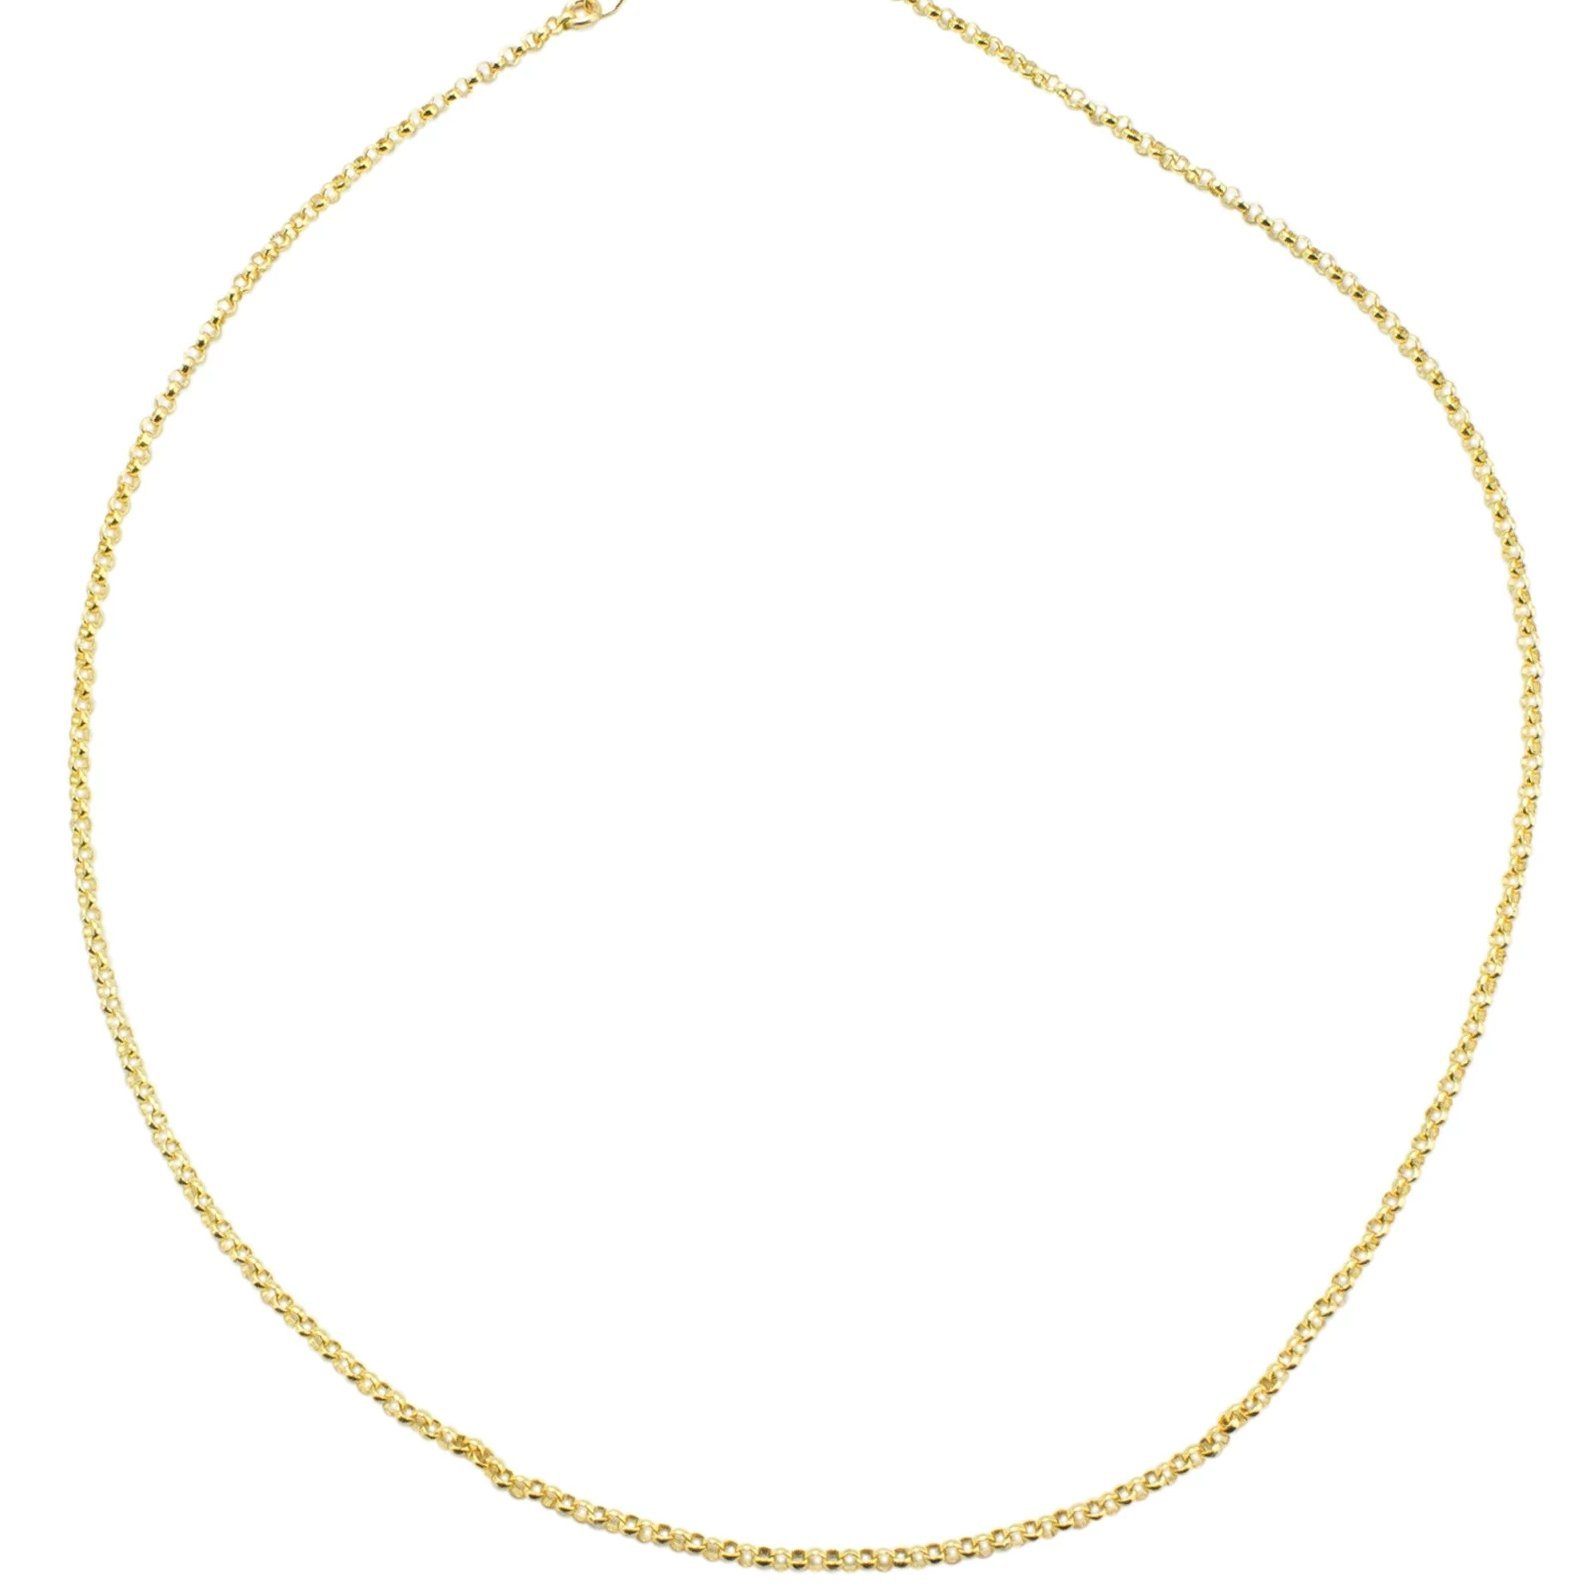 The Gold Rolo Choker Necklace, to the point, but anything except boring. Truly for every type of woman and perfectly pairs with any jewelry! A basic everyone should own.  Handmade in California by Katie Dean Jewelry.